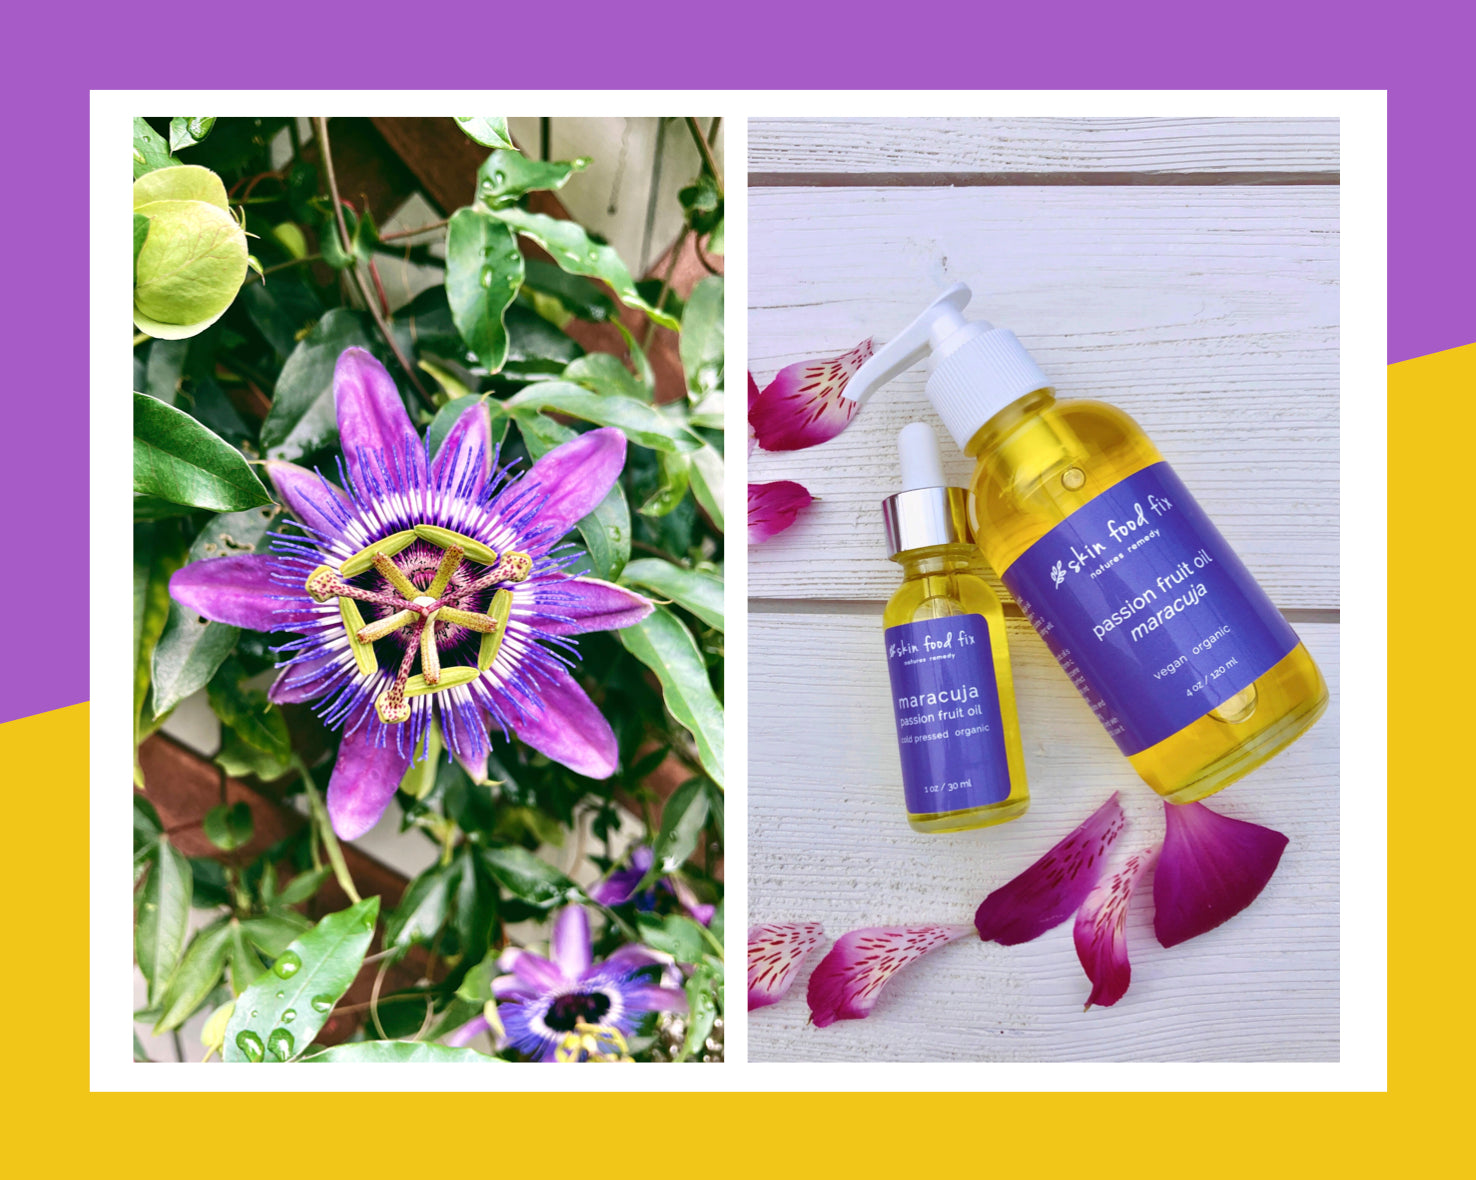 passion flower next to maracuja passion fruit seed oil